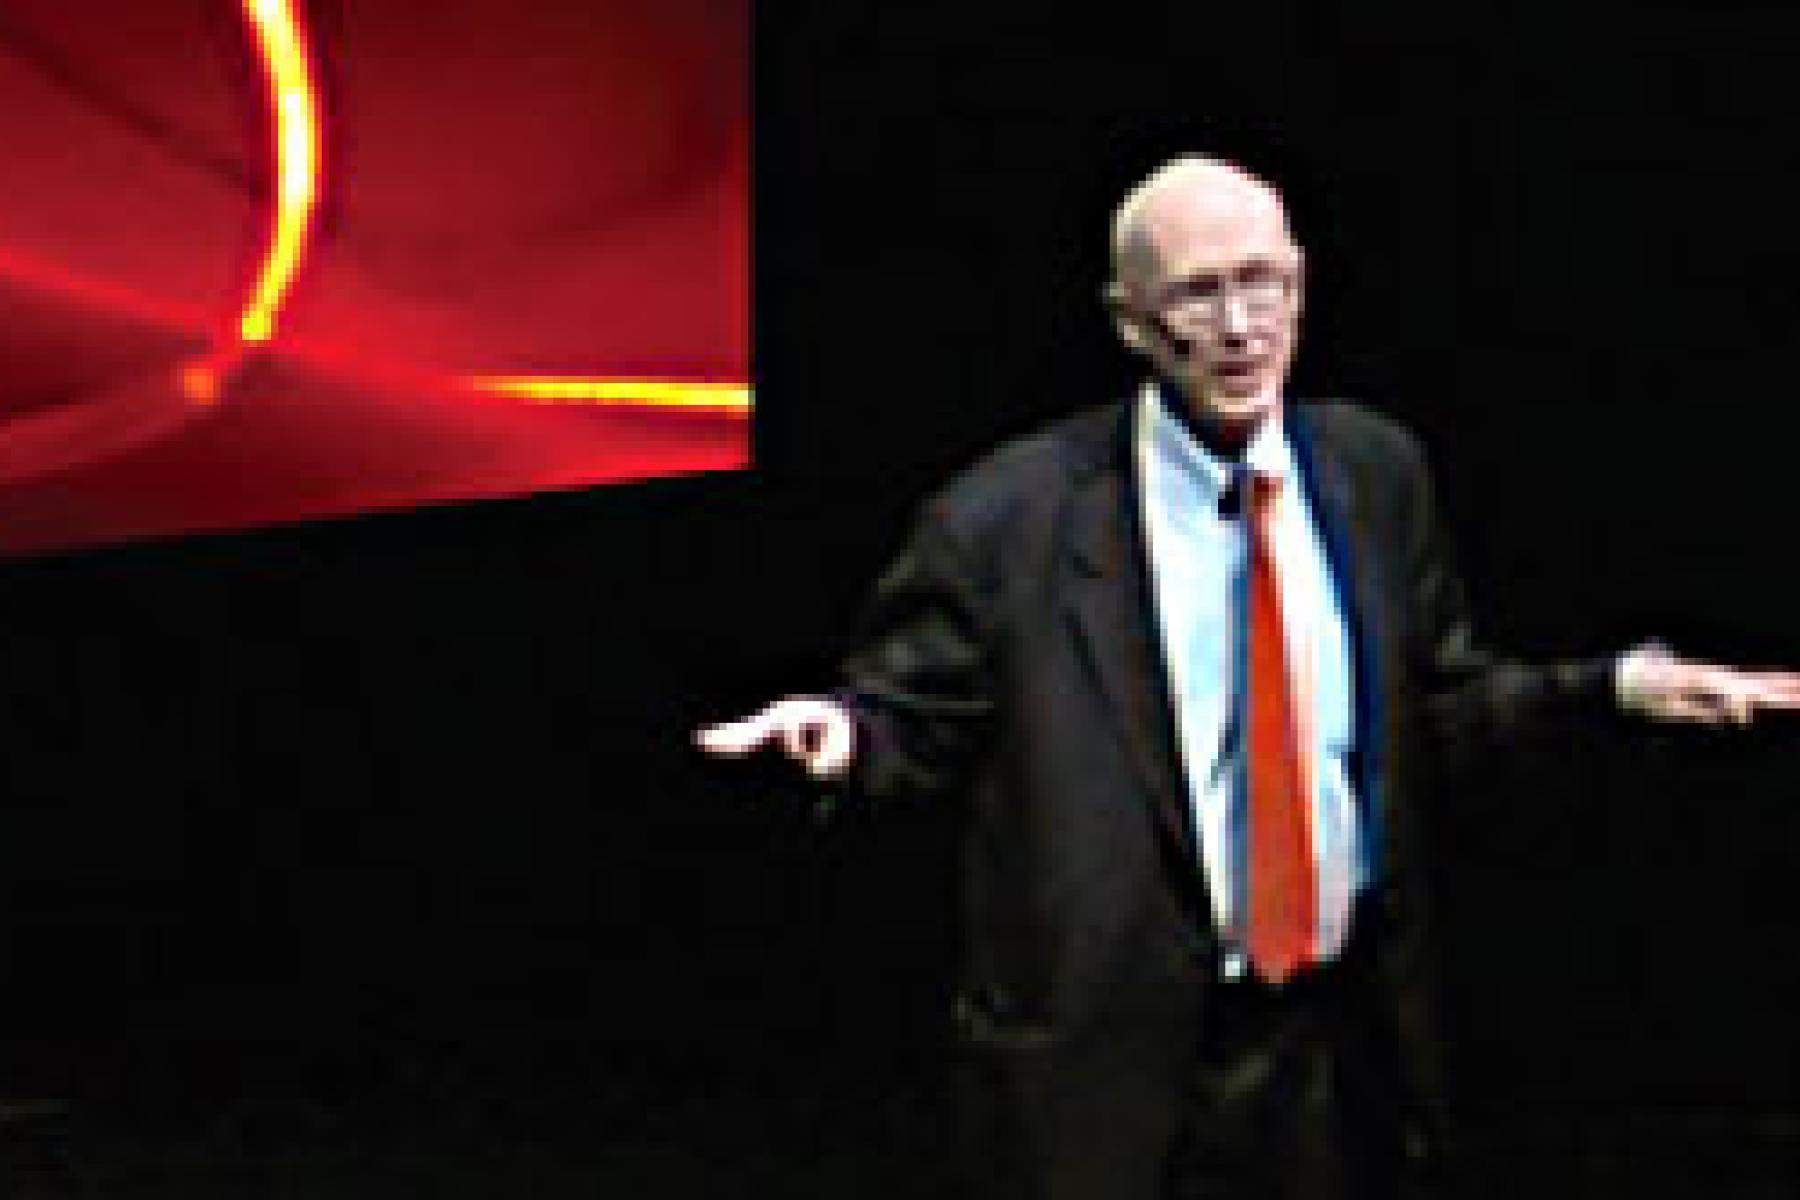 man with black coat, red tie and glasses speaks to an audience